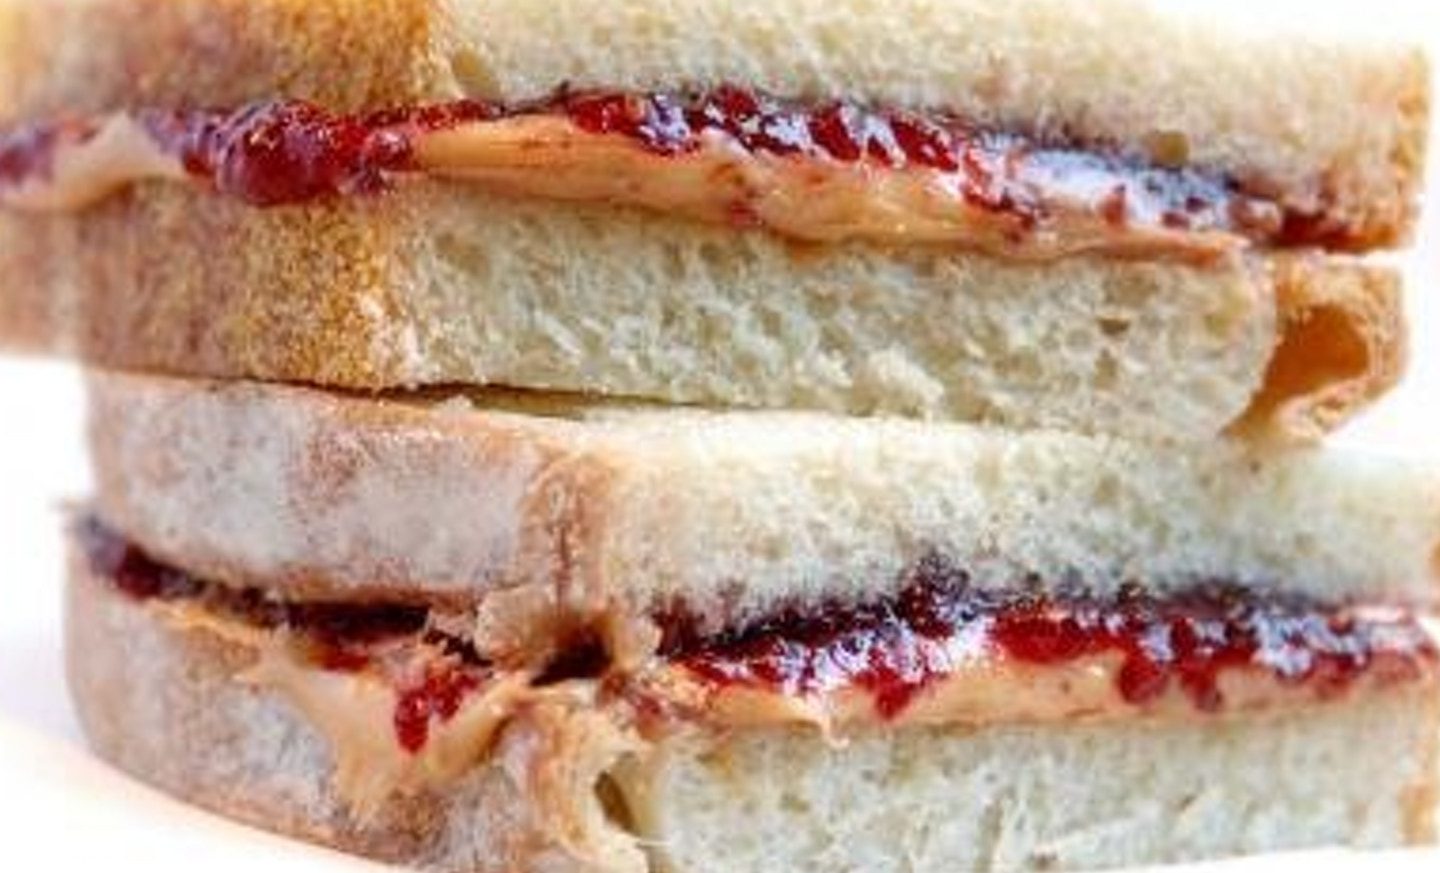 96% of People Making a Peanut Butter and Jelly Sandwich Put on the Peanut Butter First.